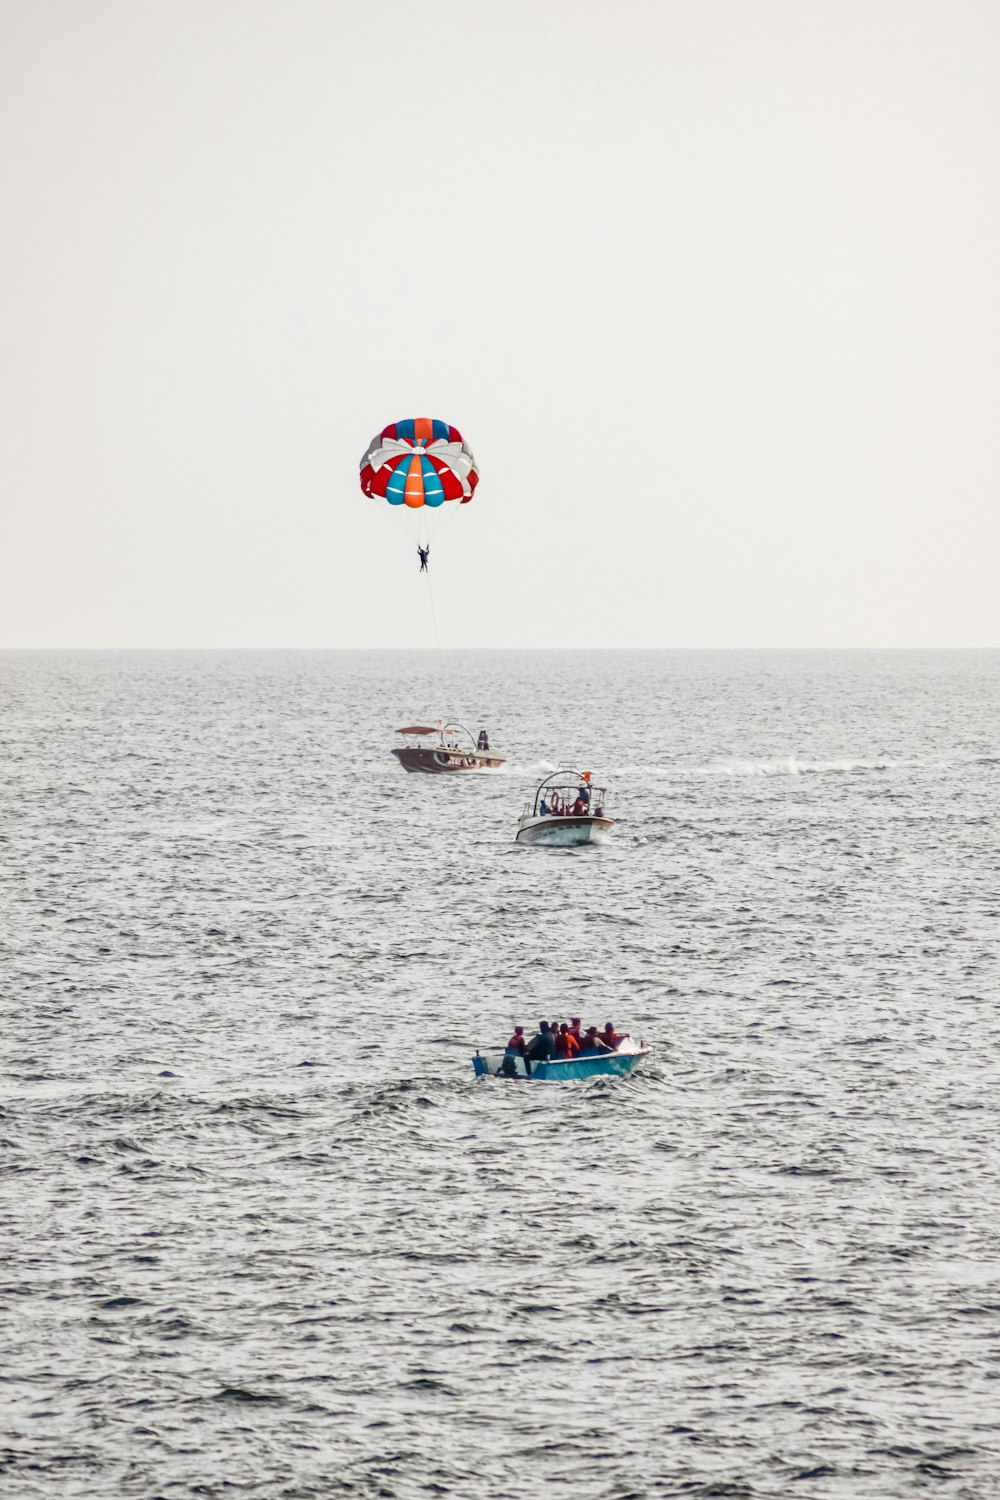 a person parasailing on a boat